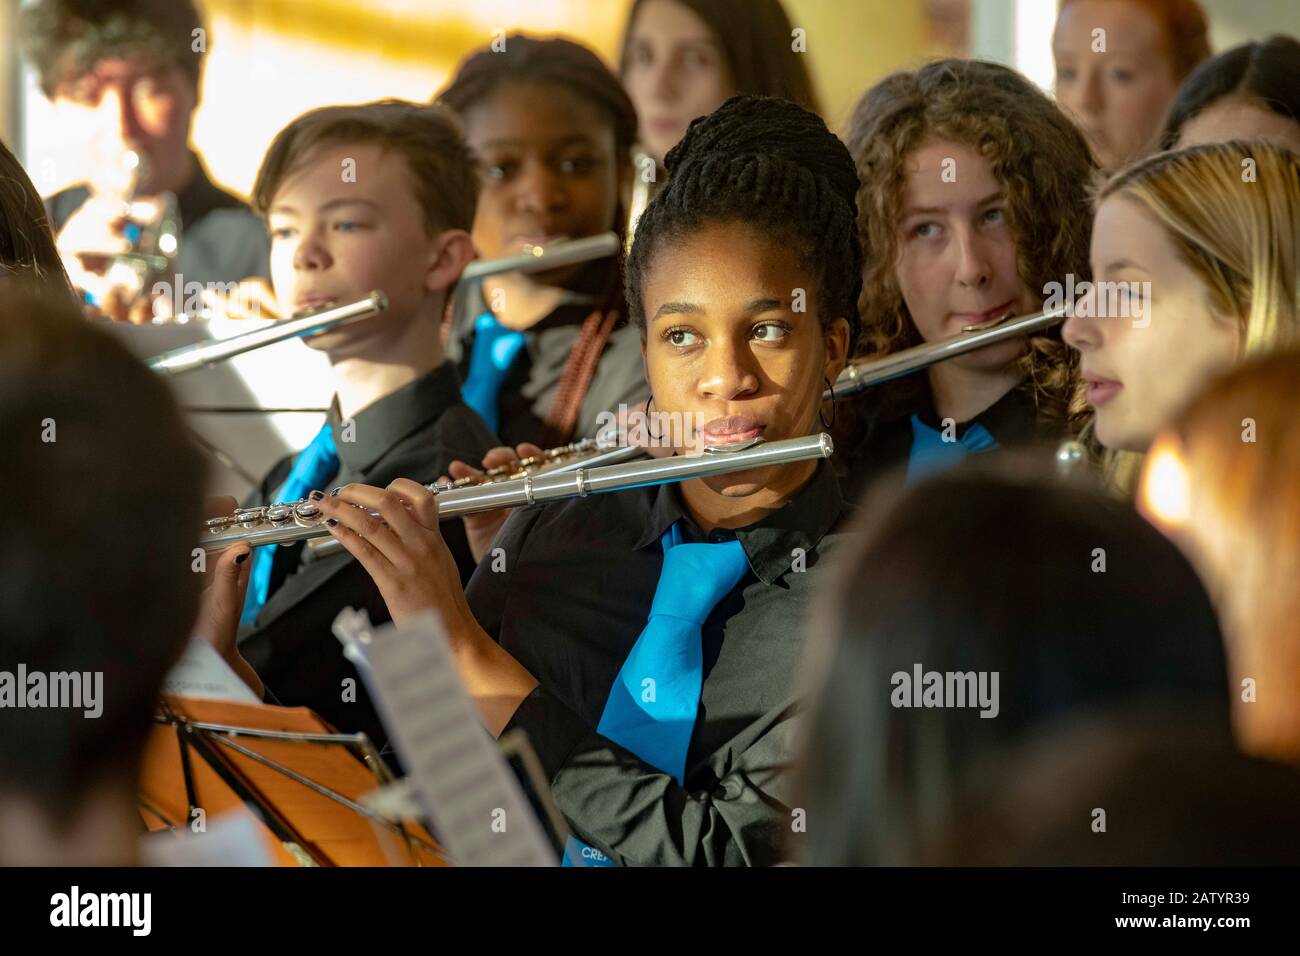 Children and young people playing in youth orchestra Stock Photo